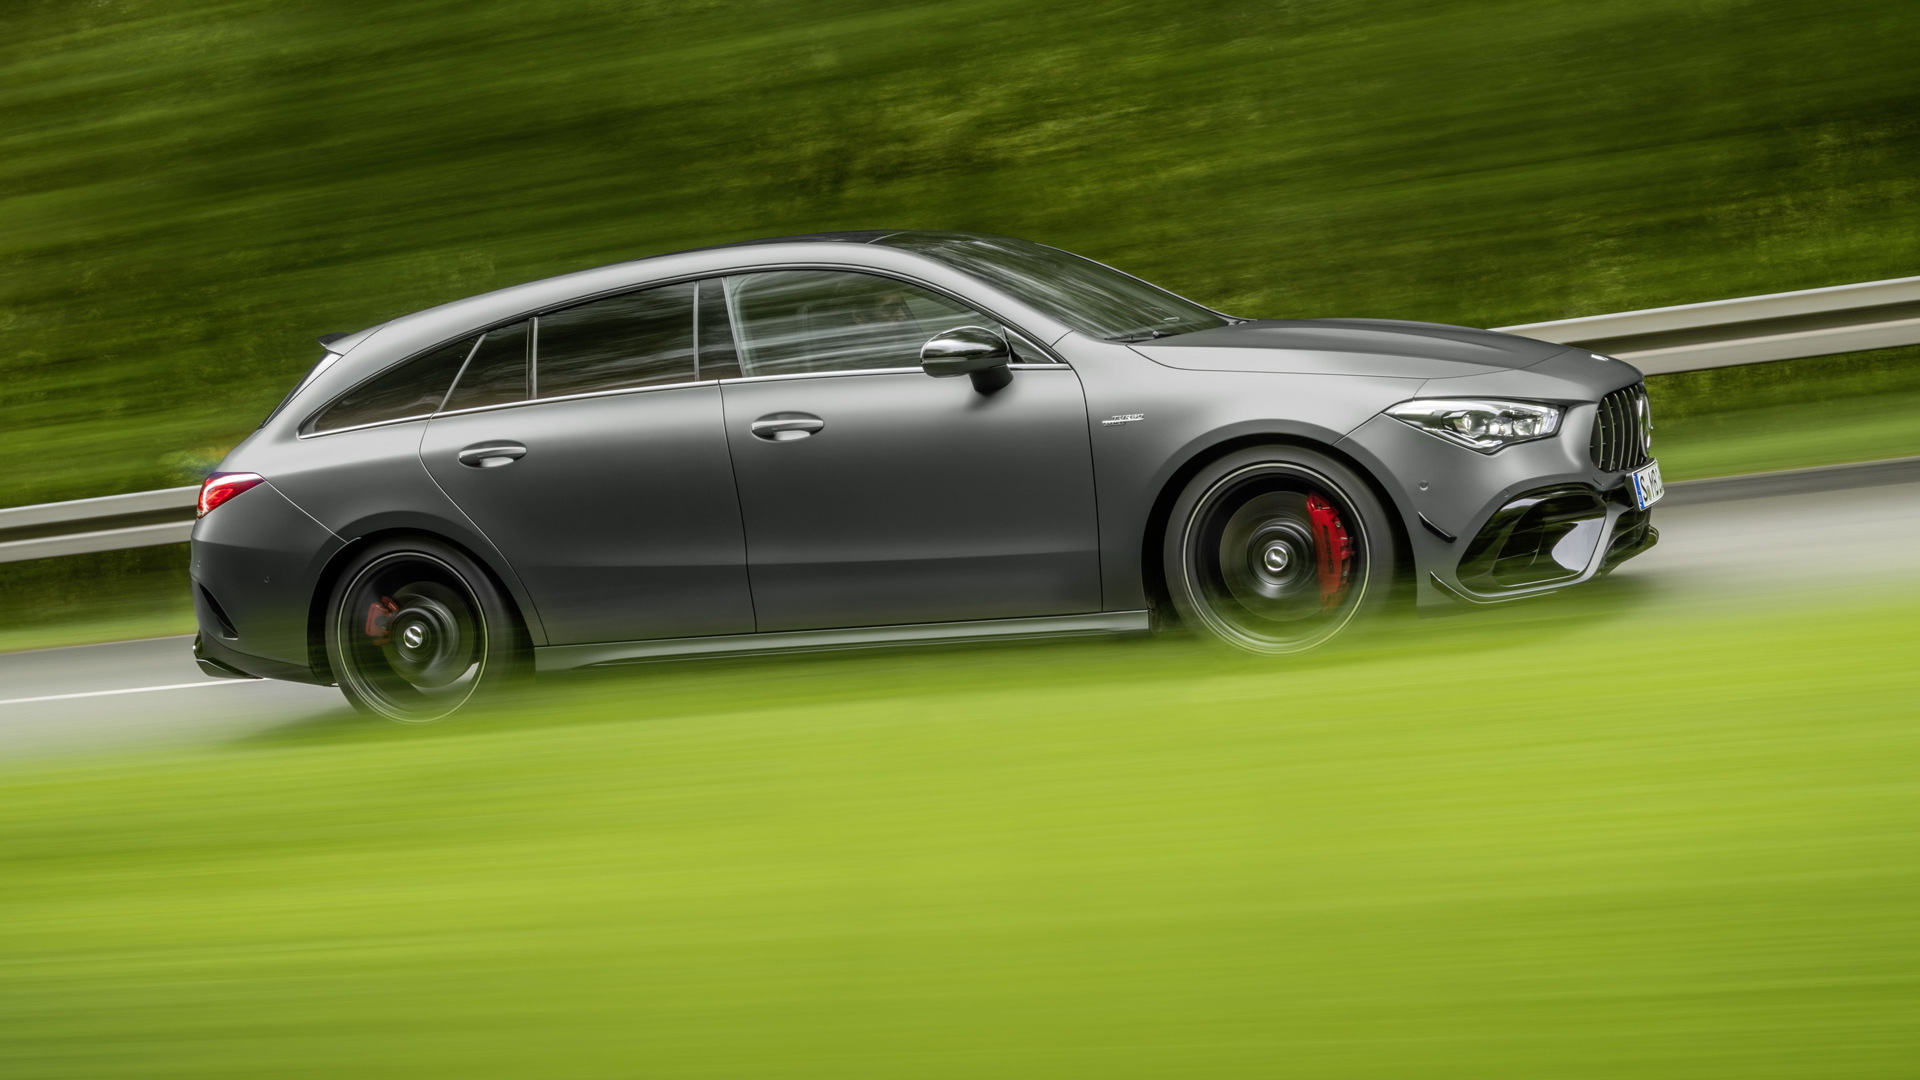 Mercedes-AMG gives its CLA 45 the practical treatment